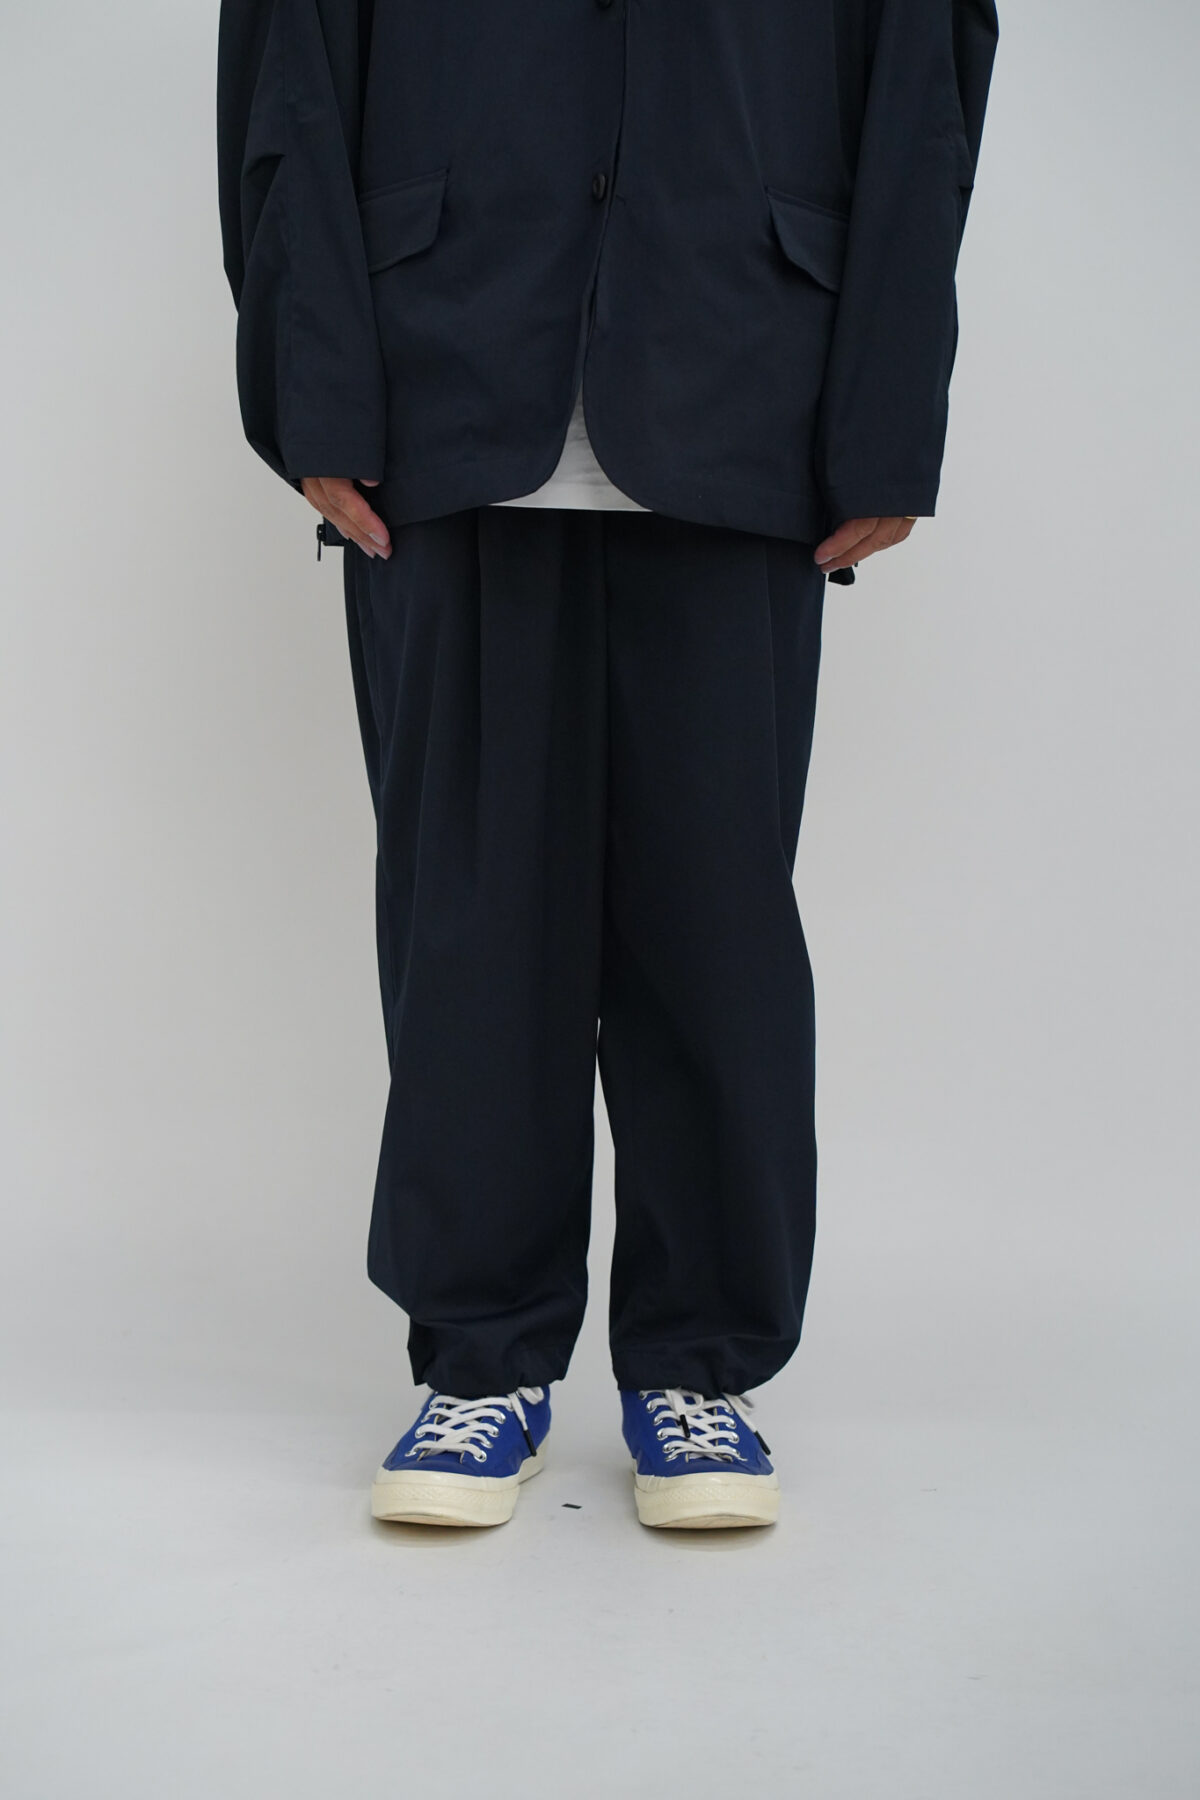 UNTRACE Basic Tapered Sweat Track Pants dr-idol.com